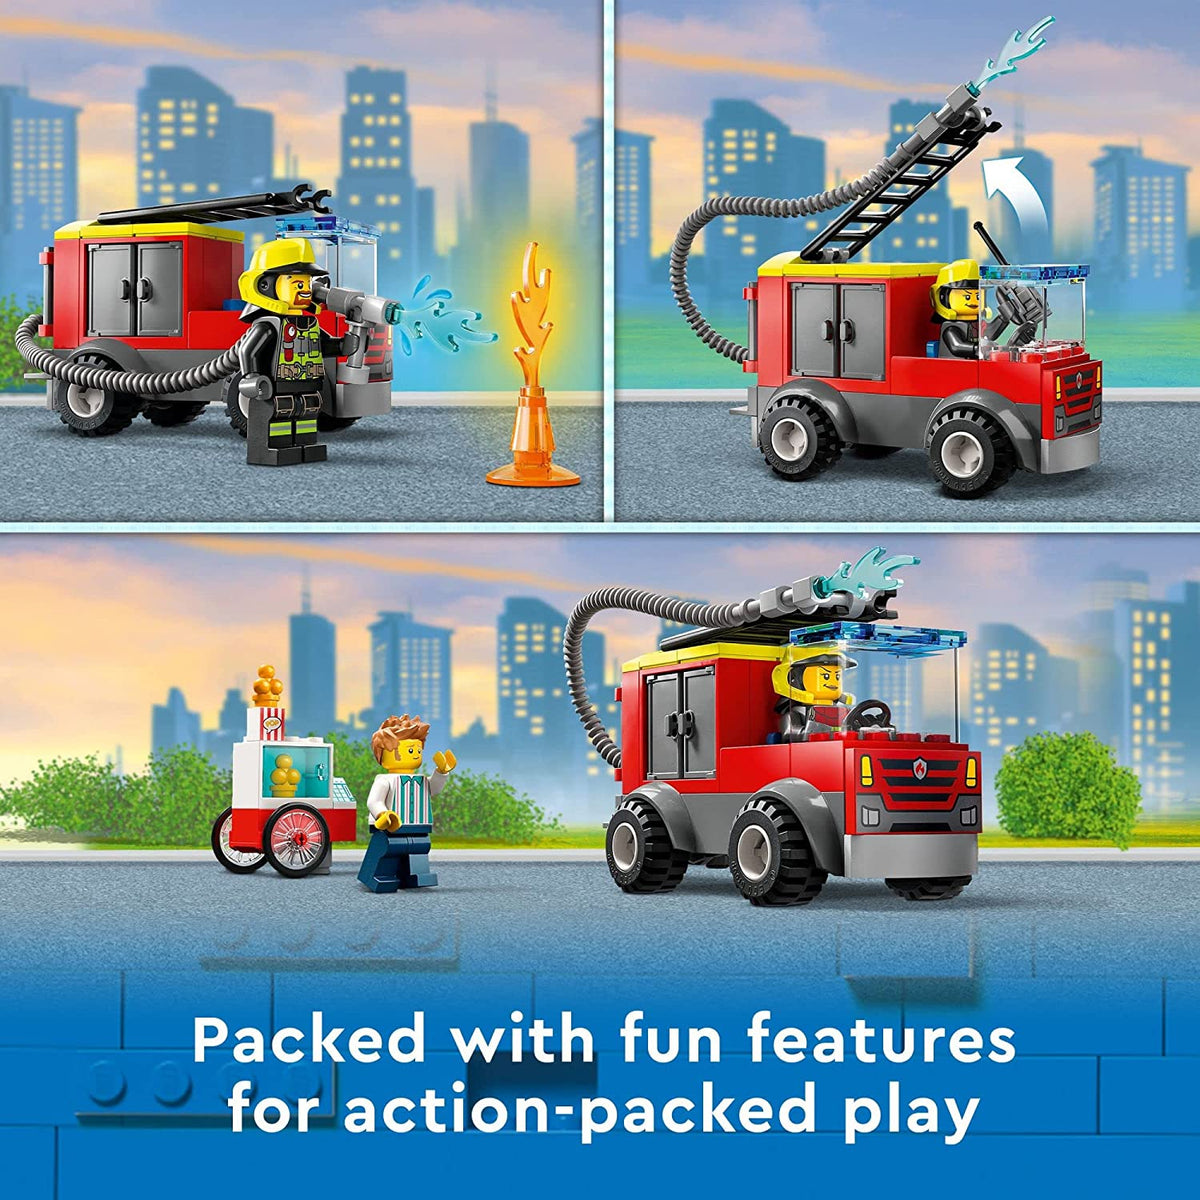 CITY 60375: Fire Station and Fire Truck